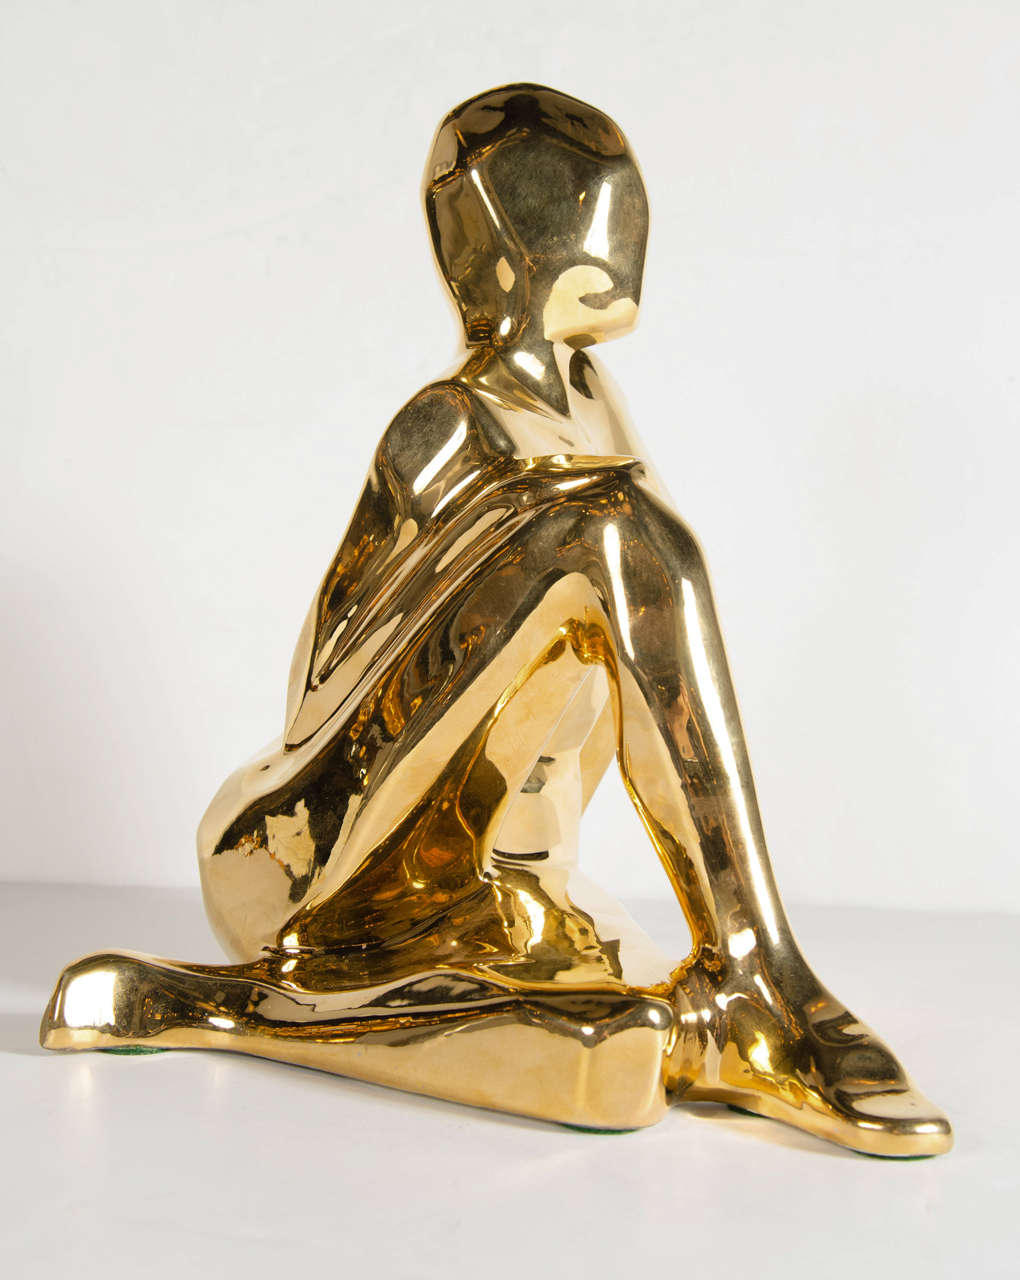 This gold-plated ceramic sculpture features a crouching figurative female sculpture with stylized Cubist form. It bears the name Jaru and dated 1975 on the bottom.